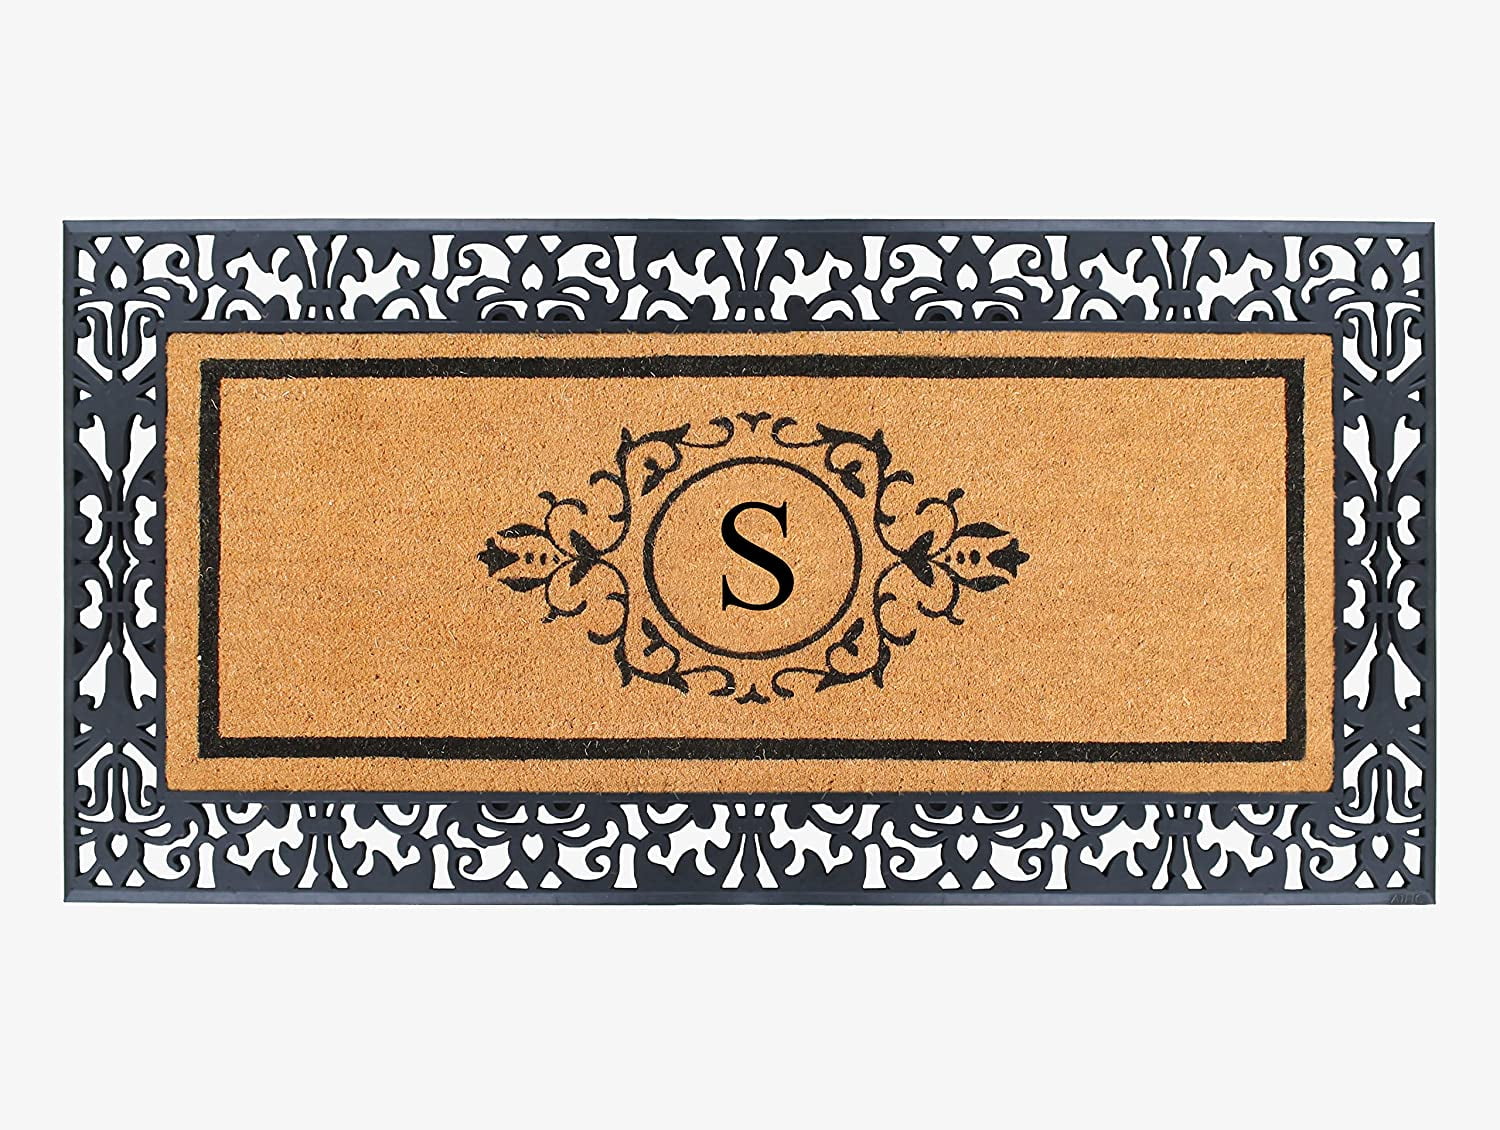 A1 Home Collections A1hc Beige 18 in. x 30 in. Natural Coir Heavy Duty PVC Backing Outdoor Monogrammed H Door Mat